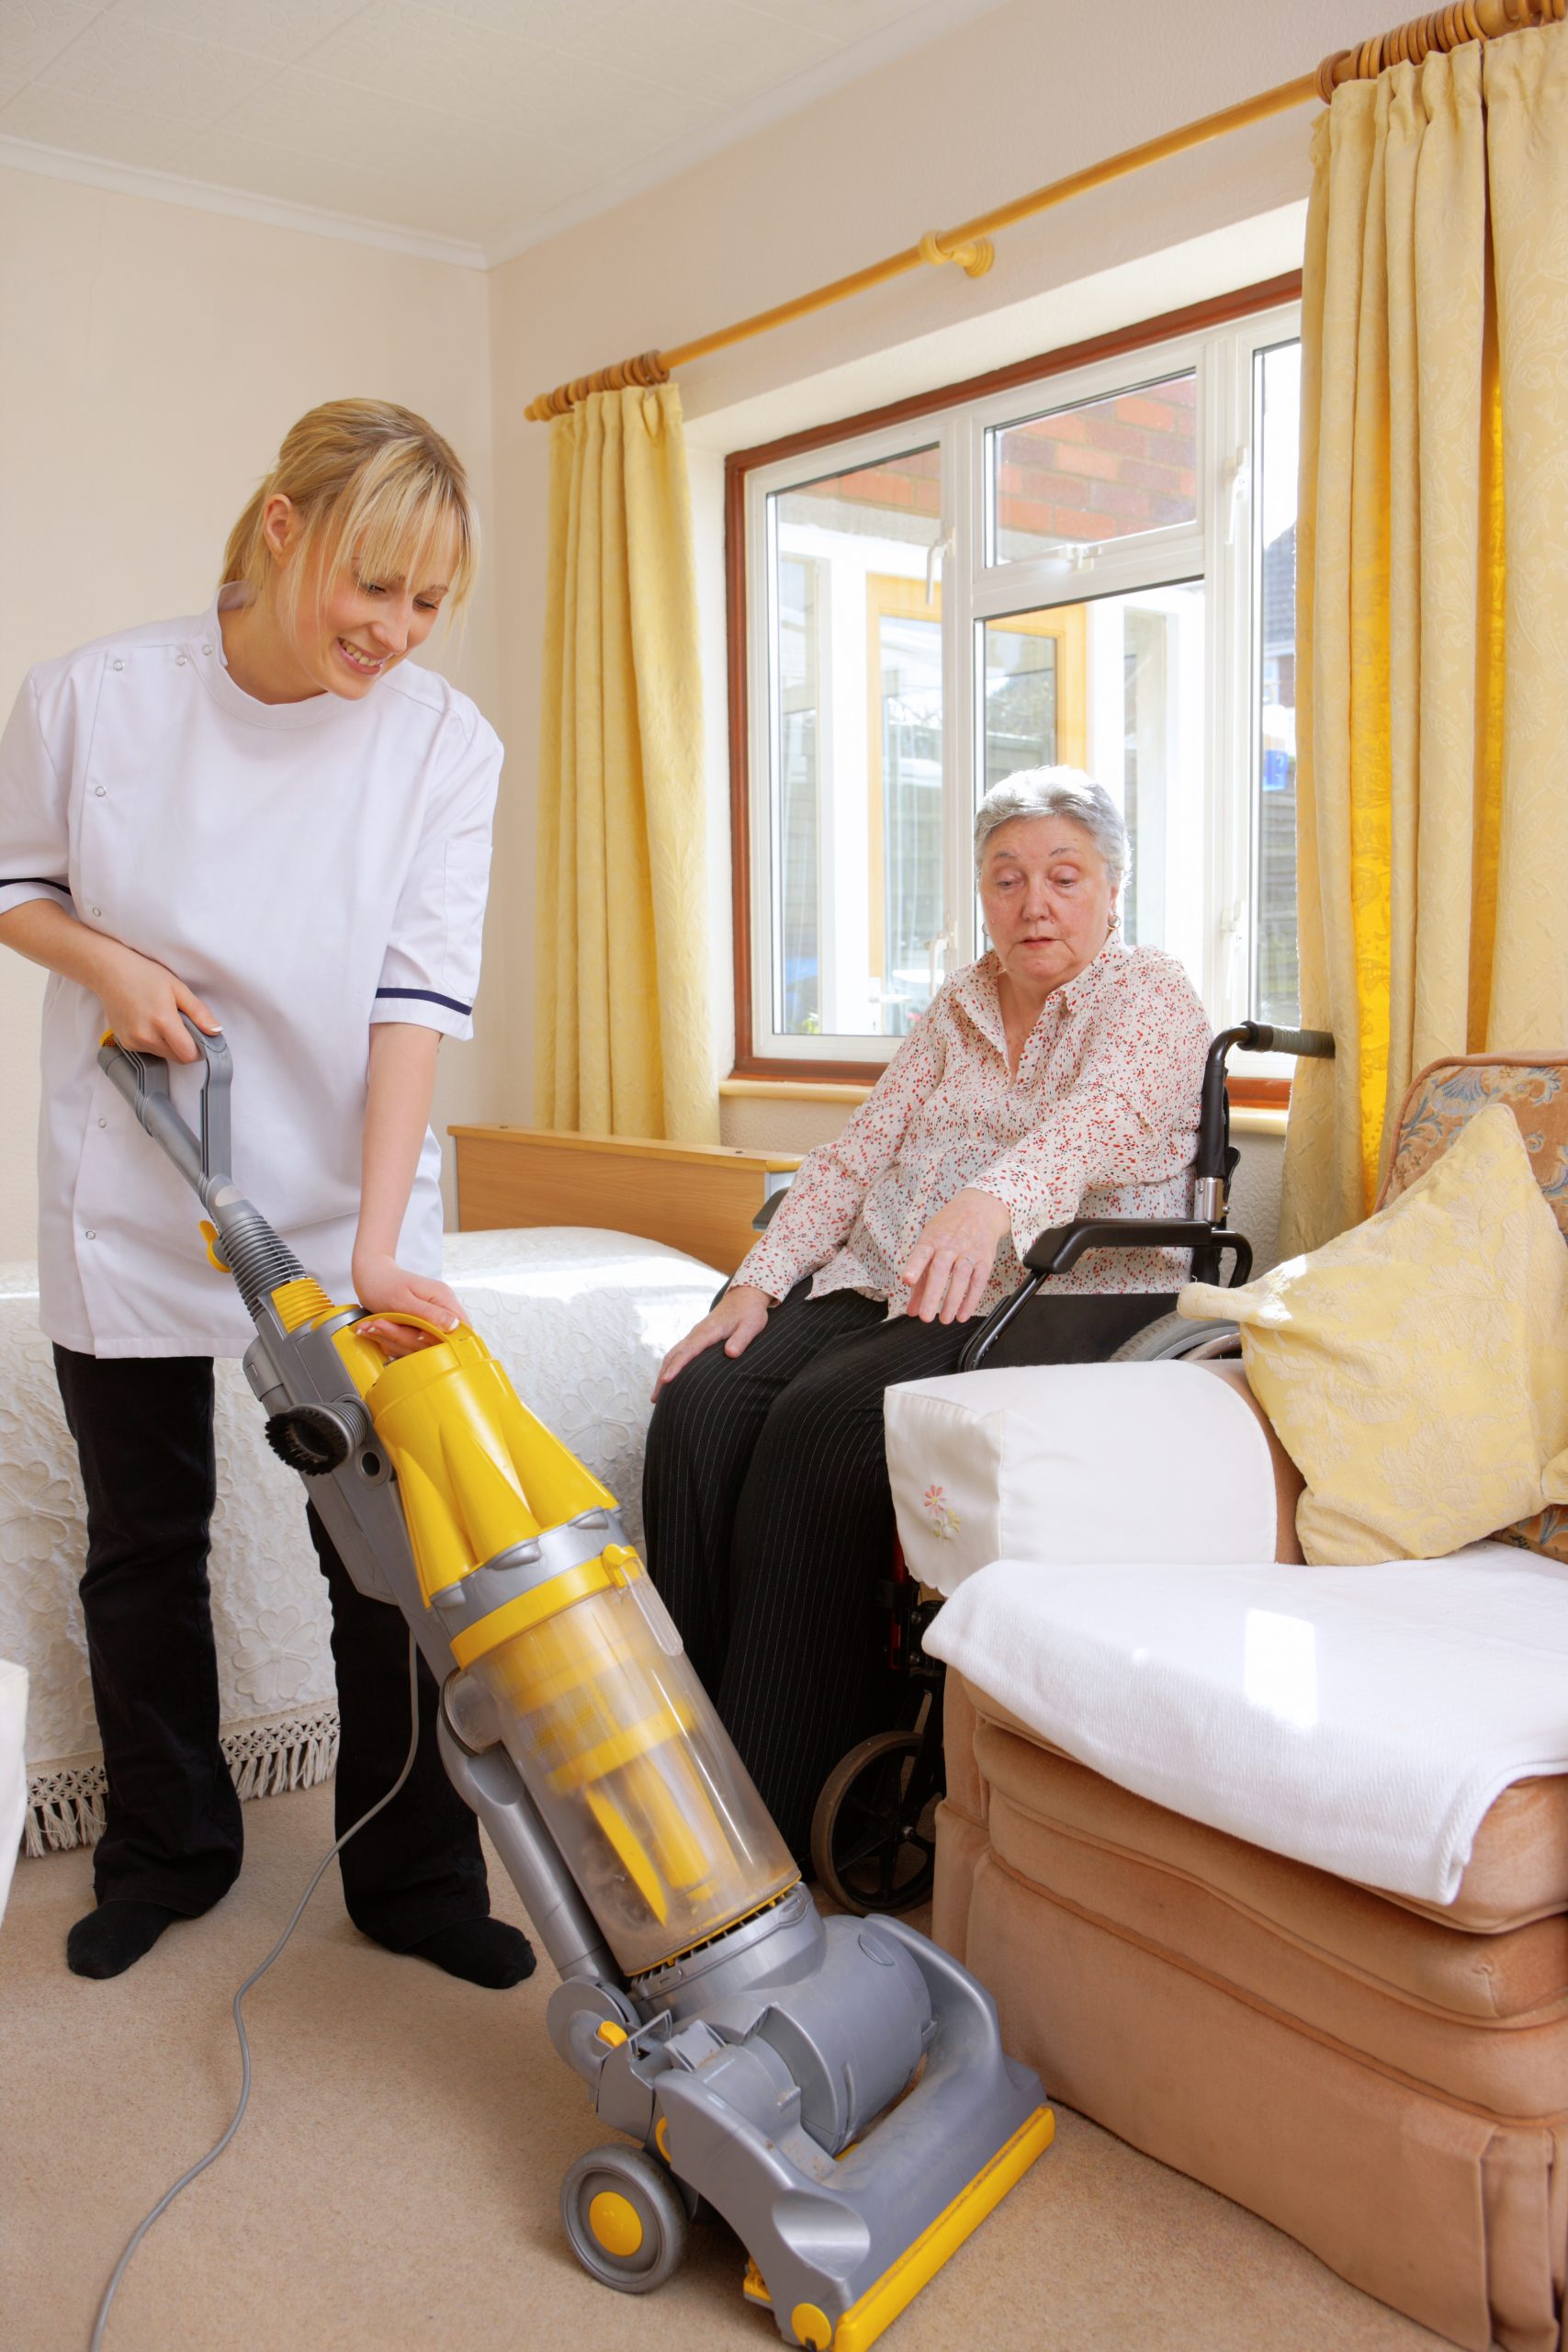 carer helps her elderly pacient by vacuuming her carpet for her